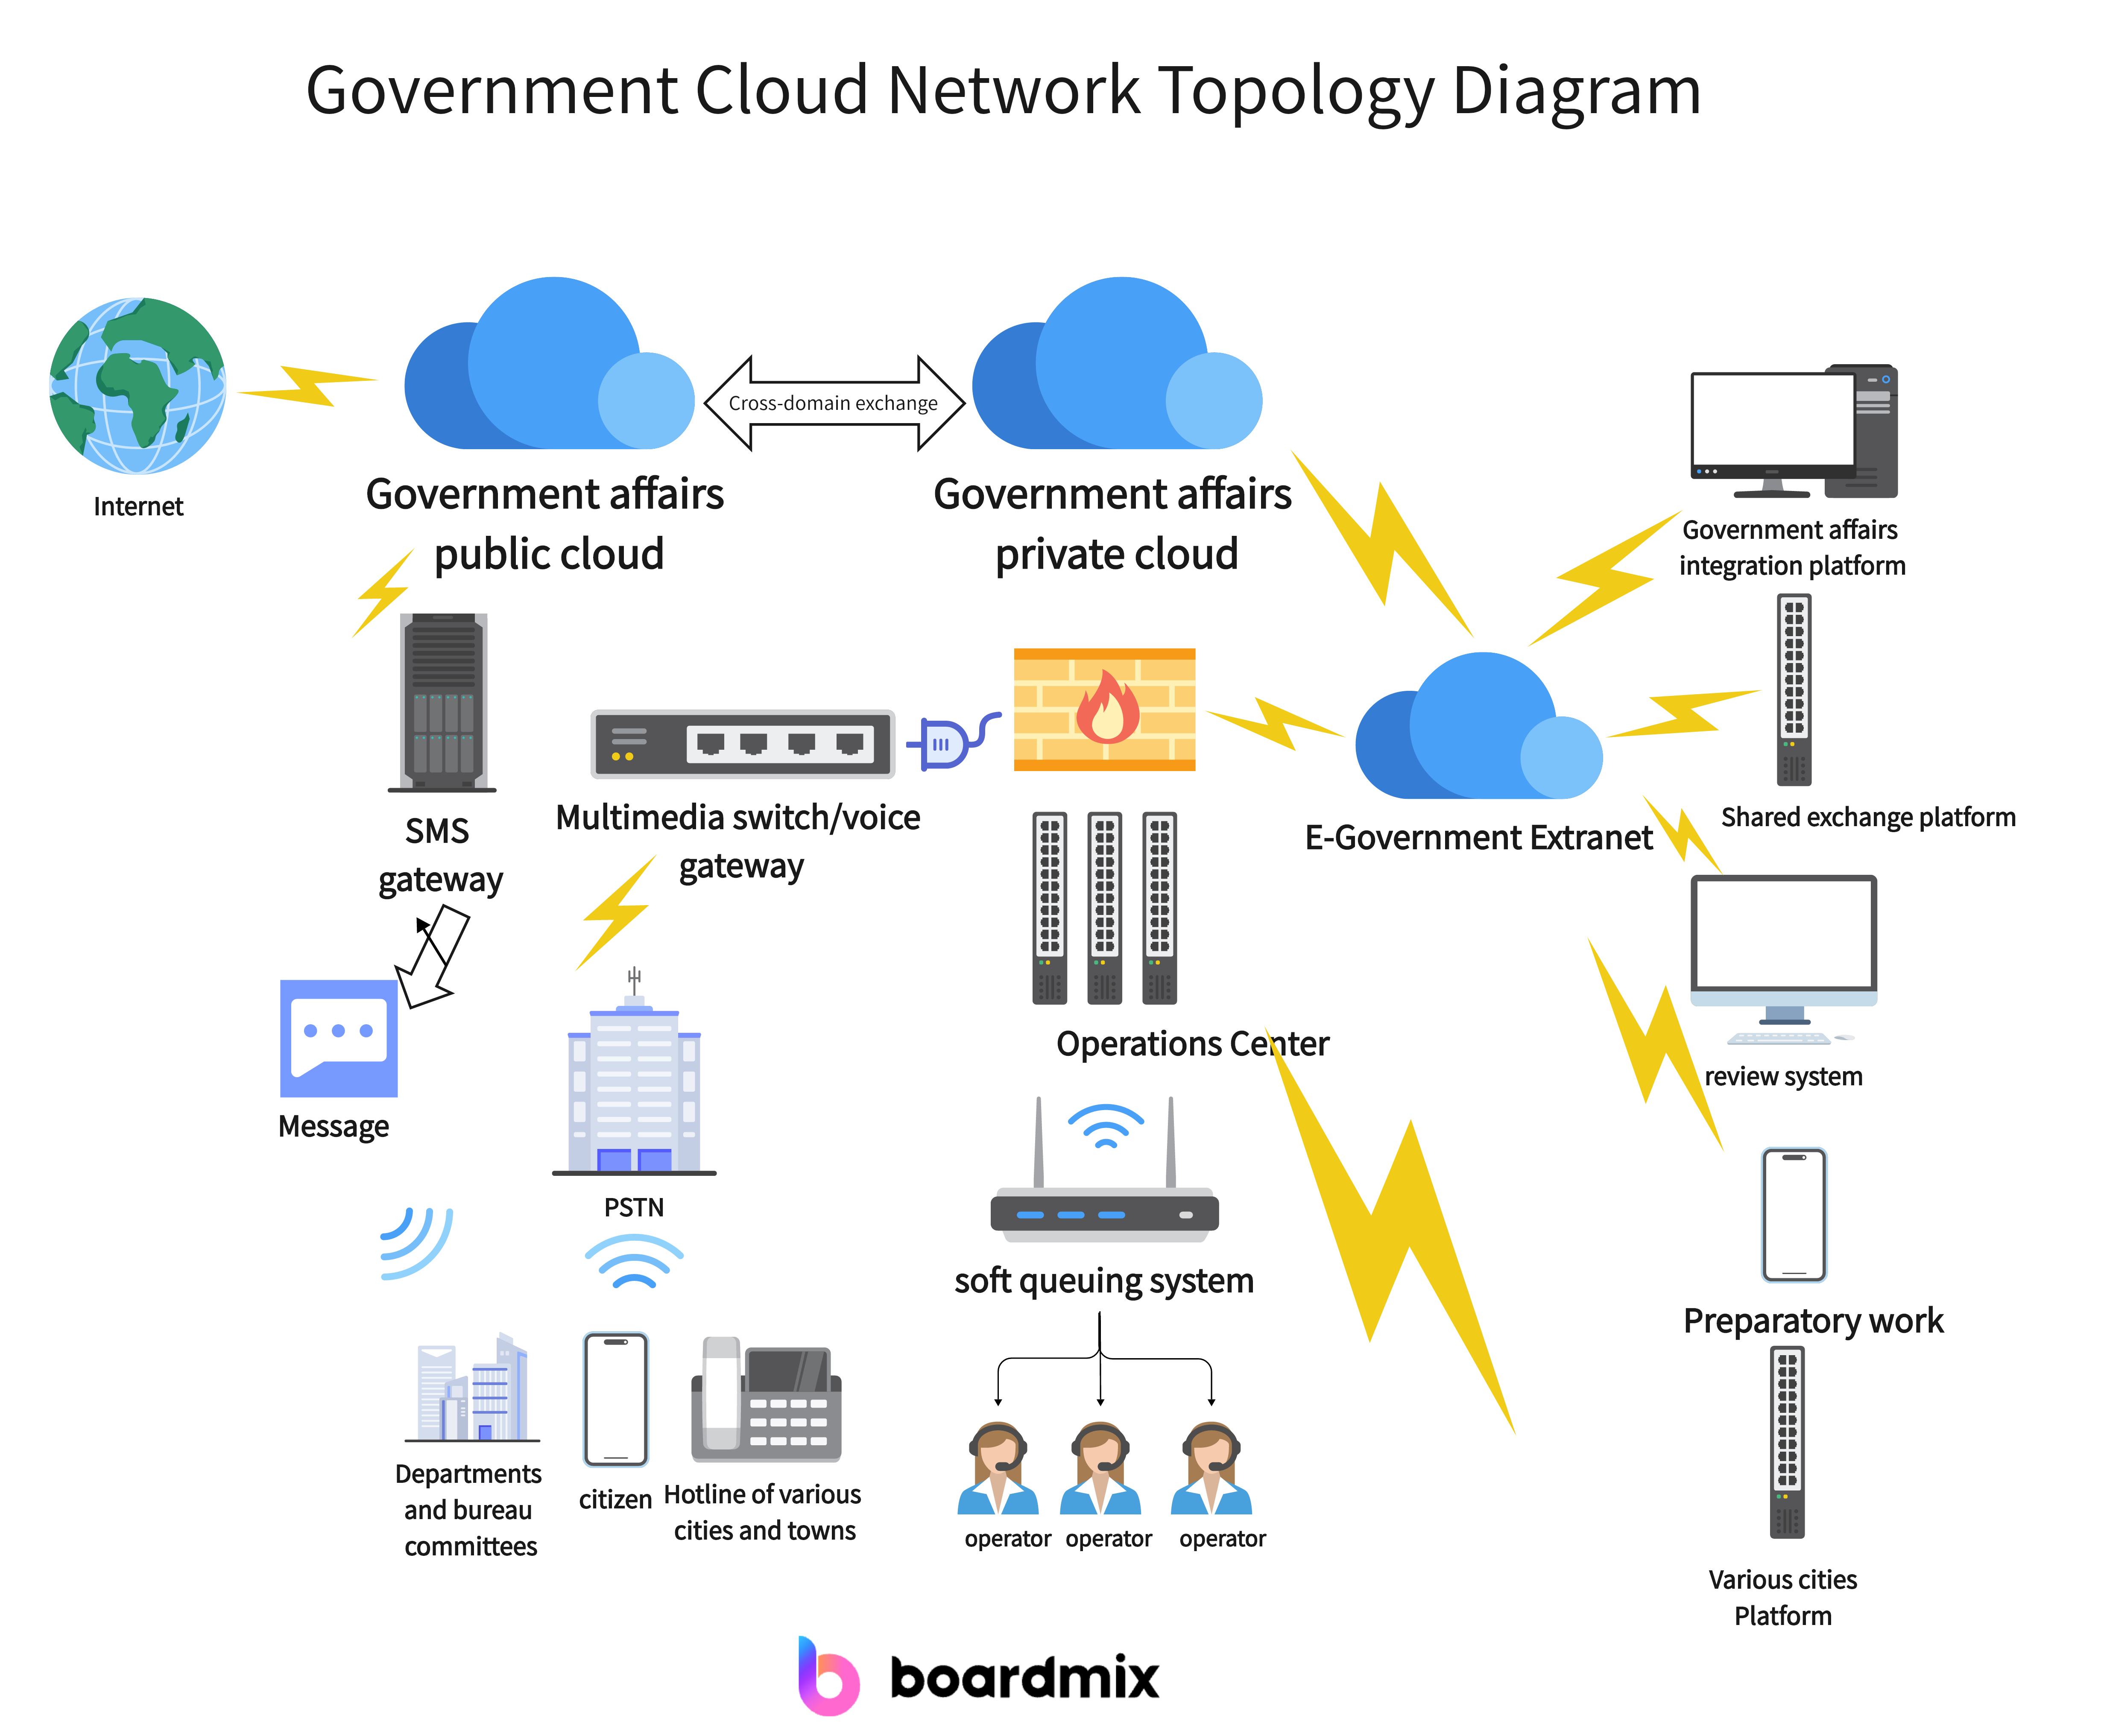 government-cloud-network-topology-diagram-in-boardmix.png